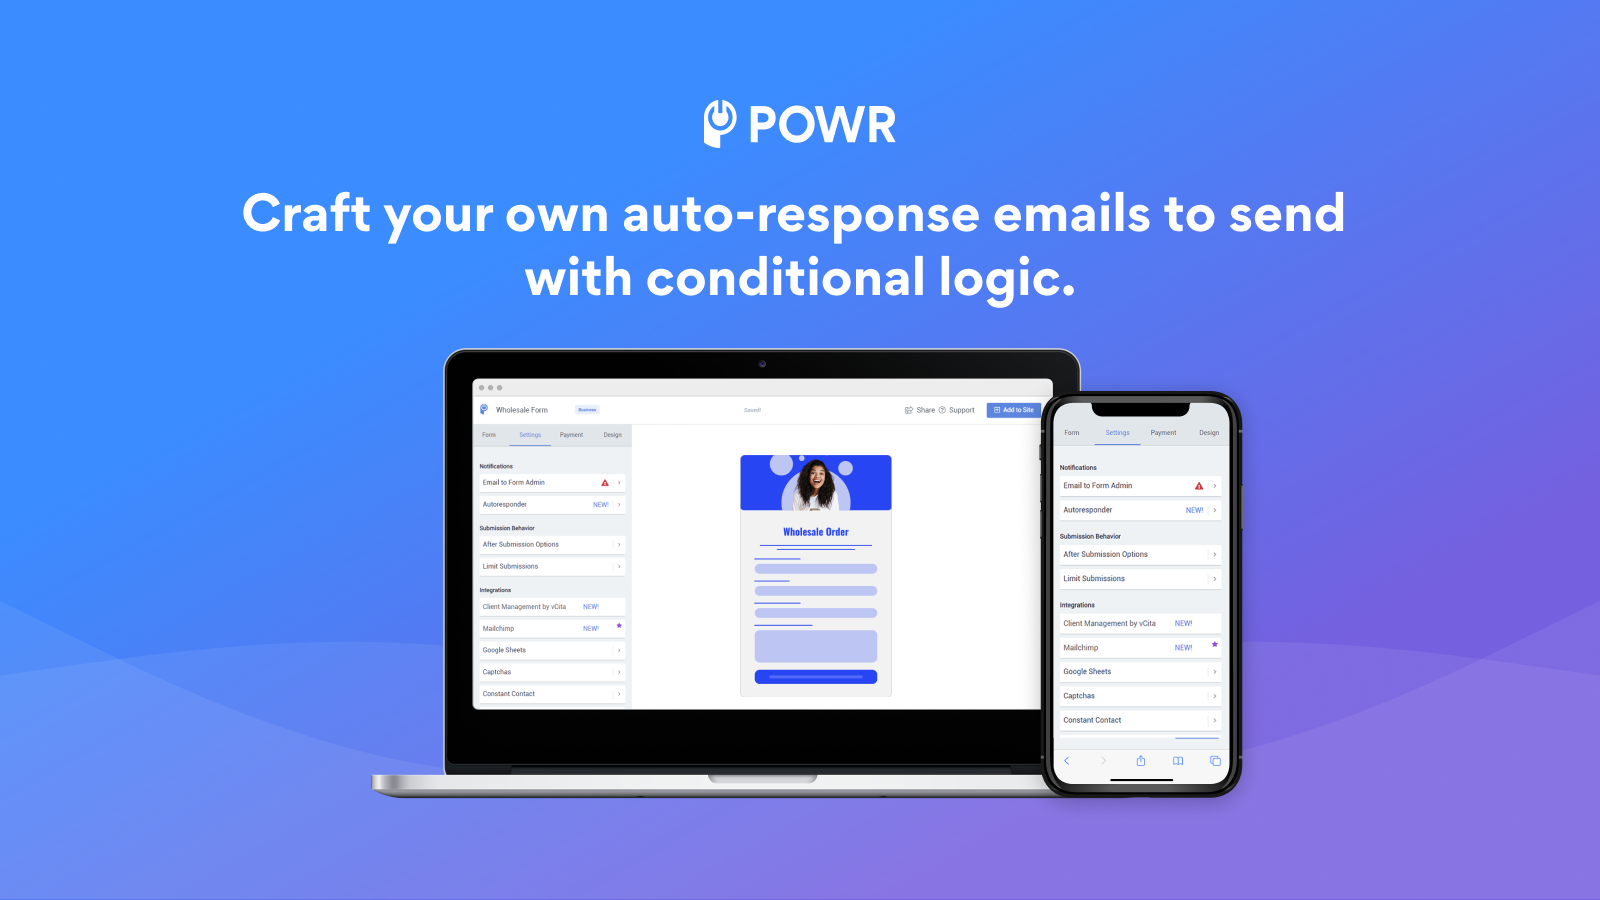 Craft your own auto-response emails to send.